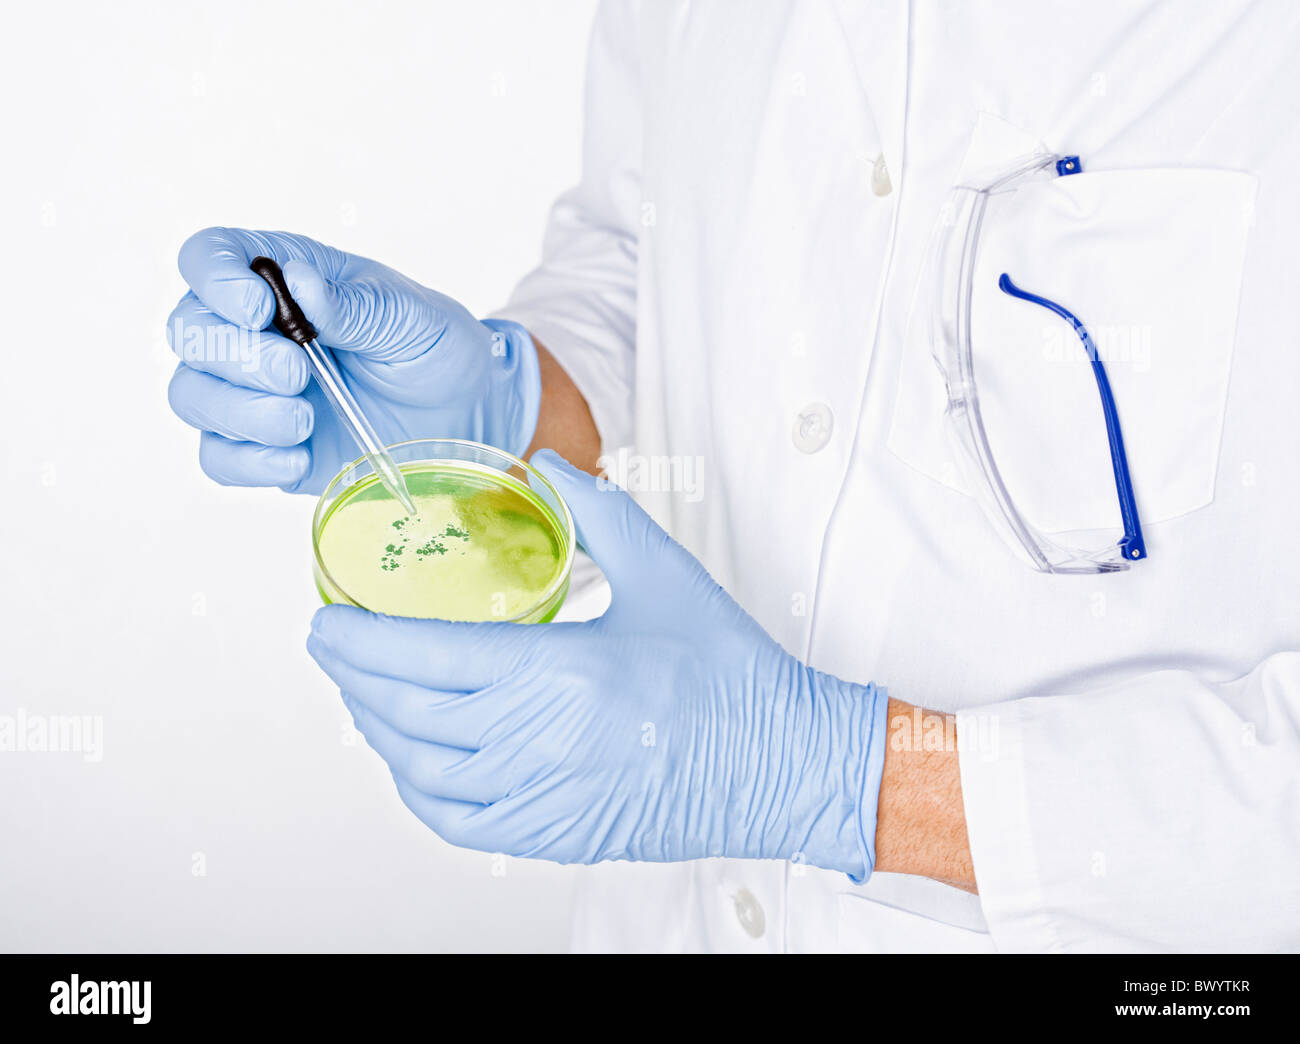 Hispanic scientist working with dropper and petri dish Stock Photo